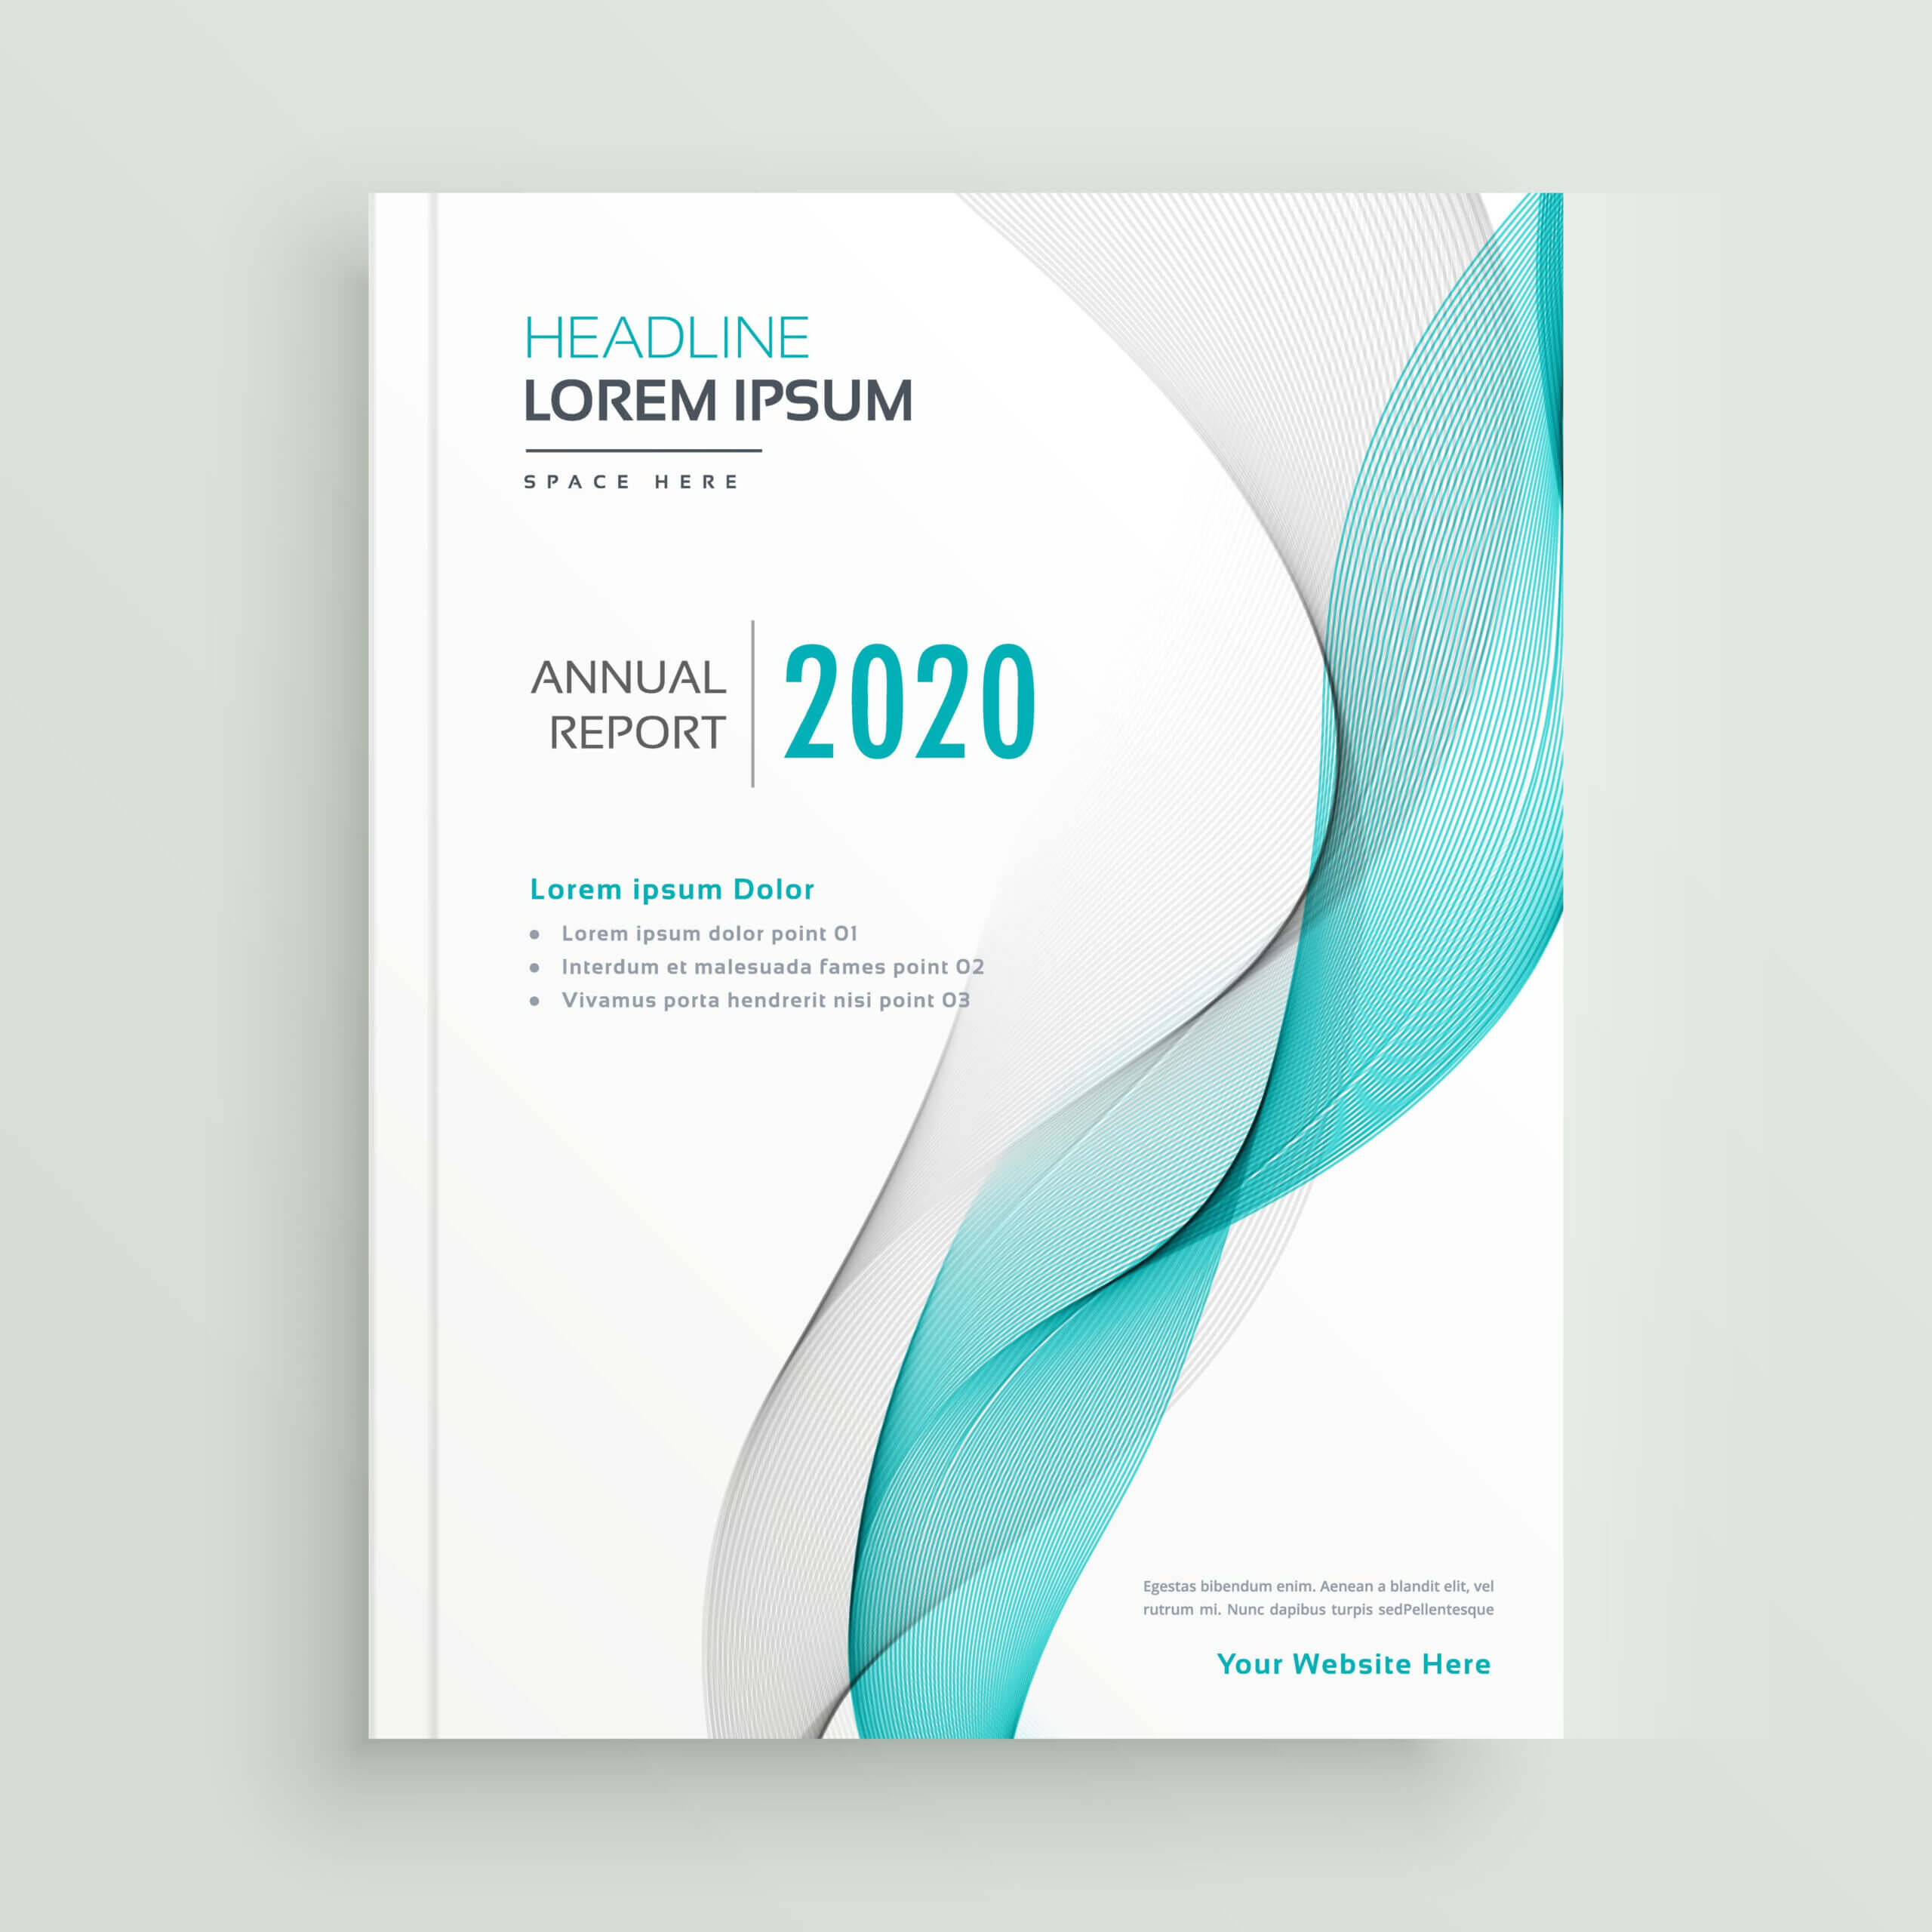 Professional Business Brochure Or Book Cover Design Template Throughout Cover Page For Annual Report Template